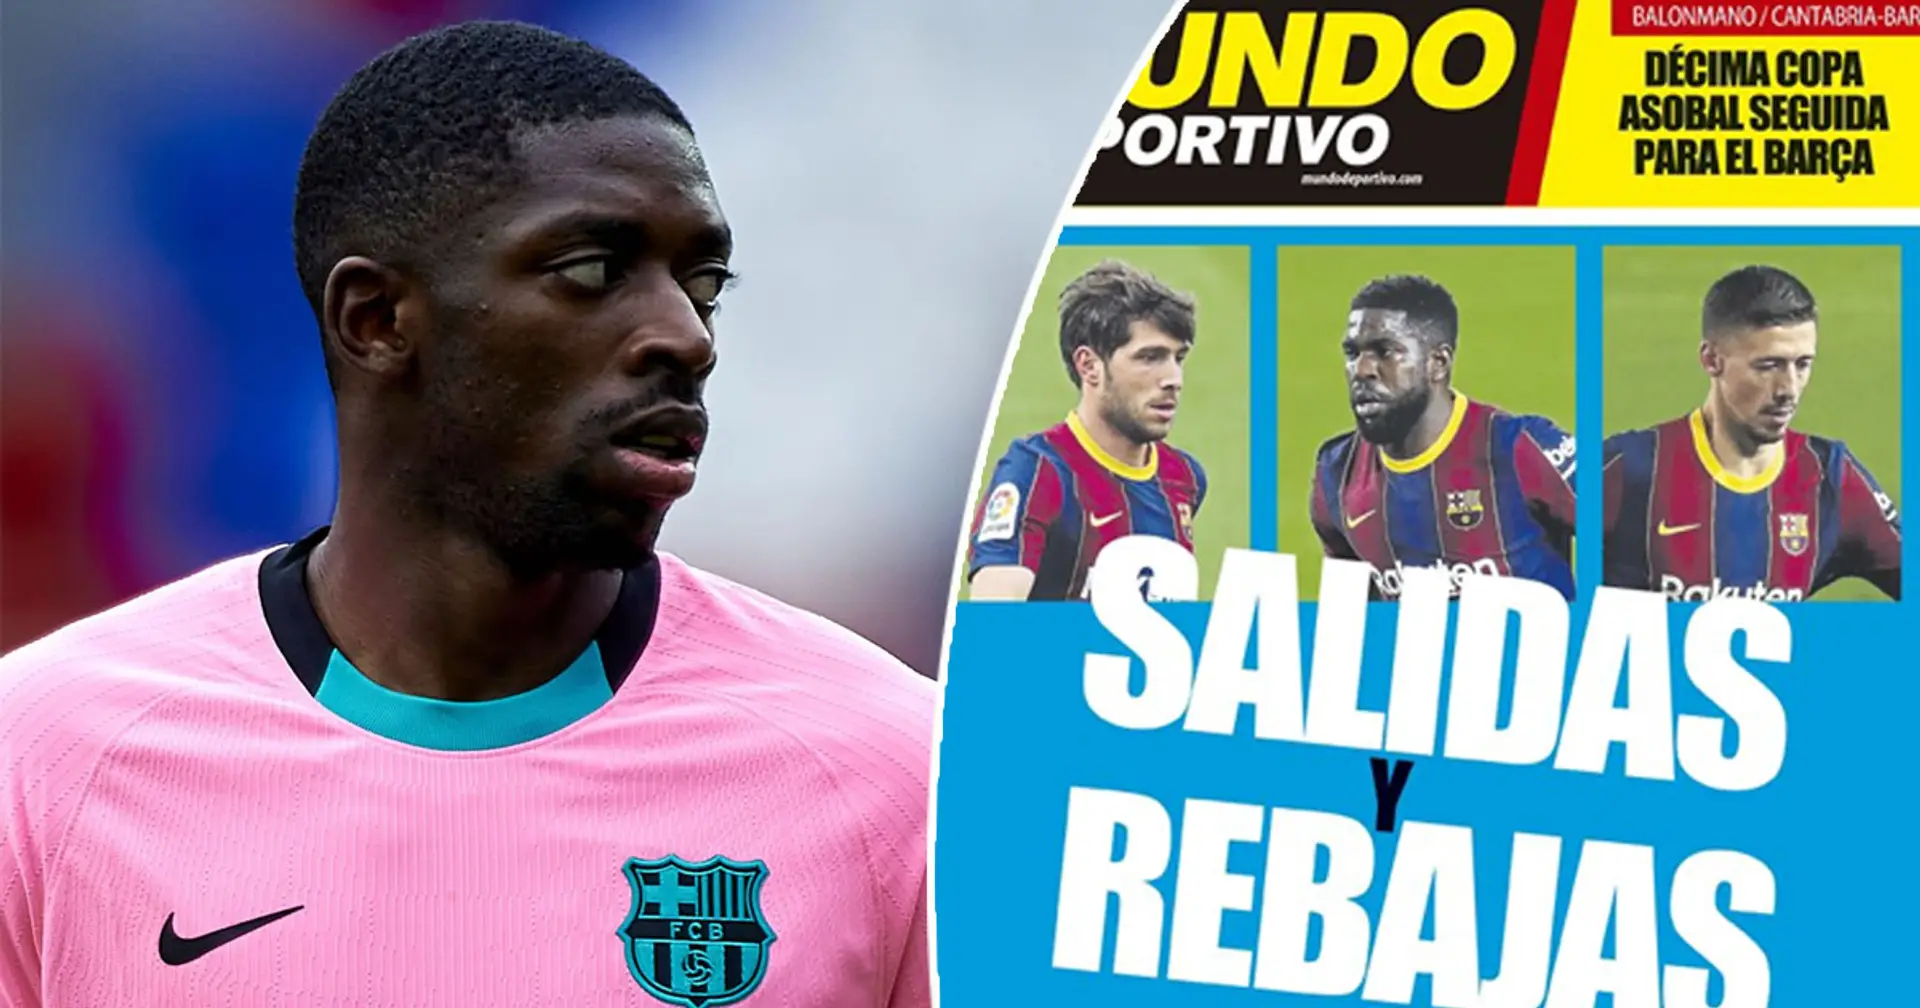 Barca to meet with agents of 6 players to discuss their future, Dembele and Alba included (reliability: 5 stars)